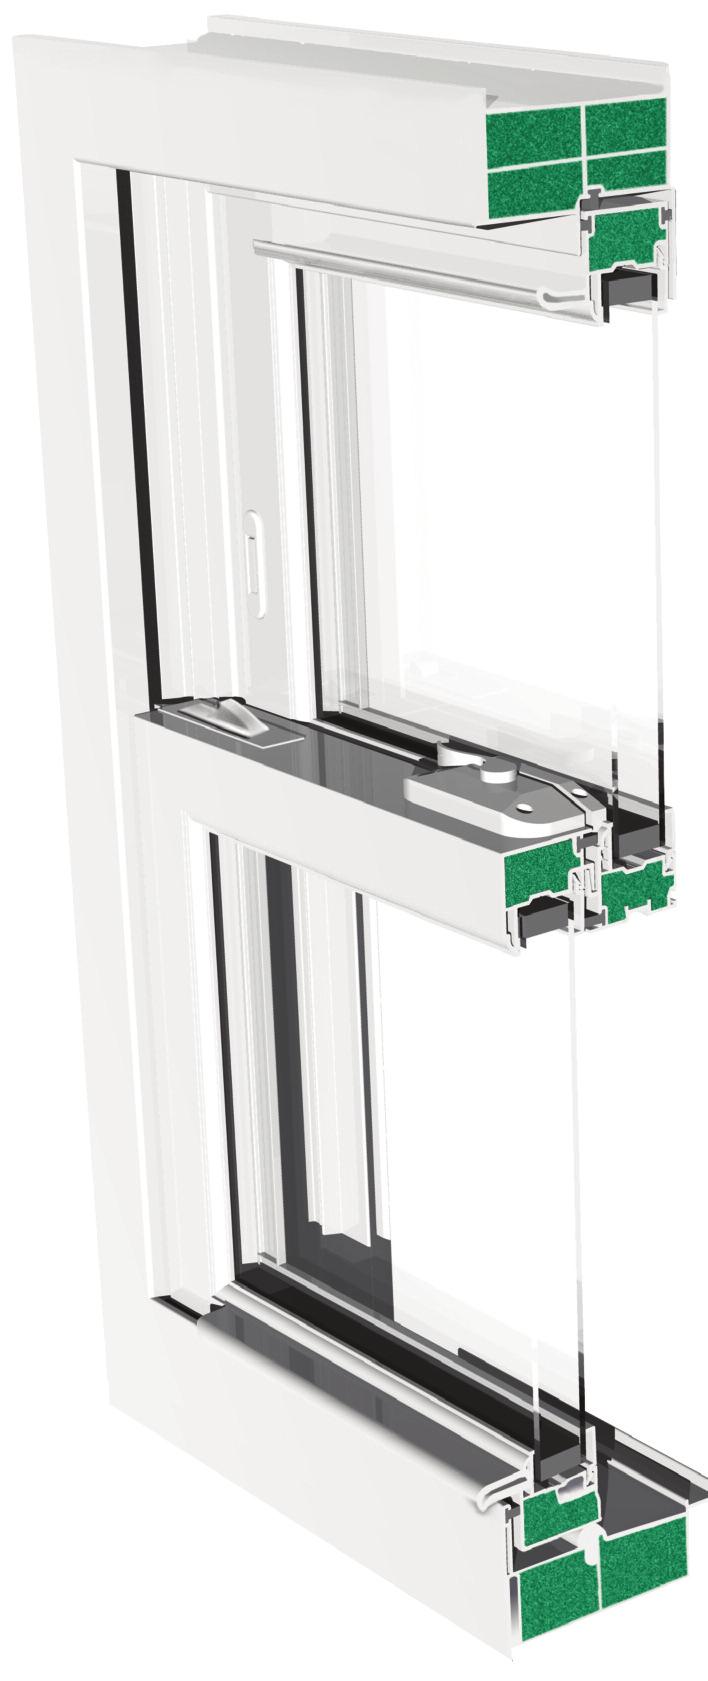 Double Hung Windows An industry leading performing double hung window oﬀering premium